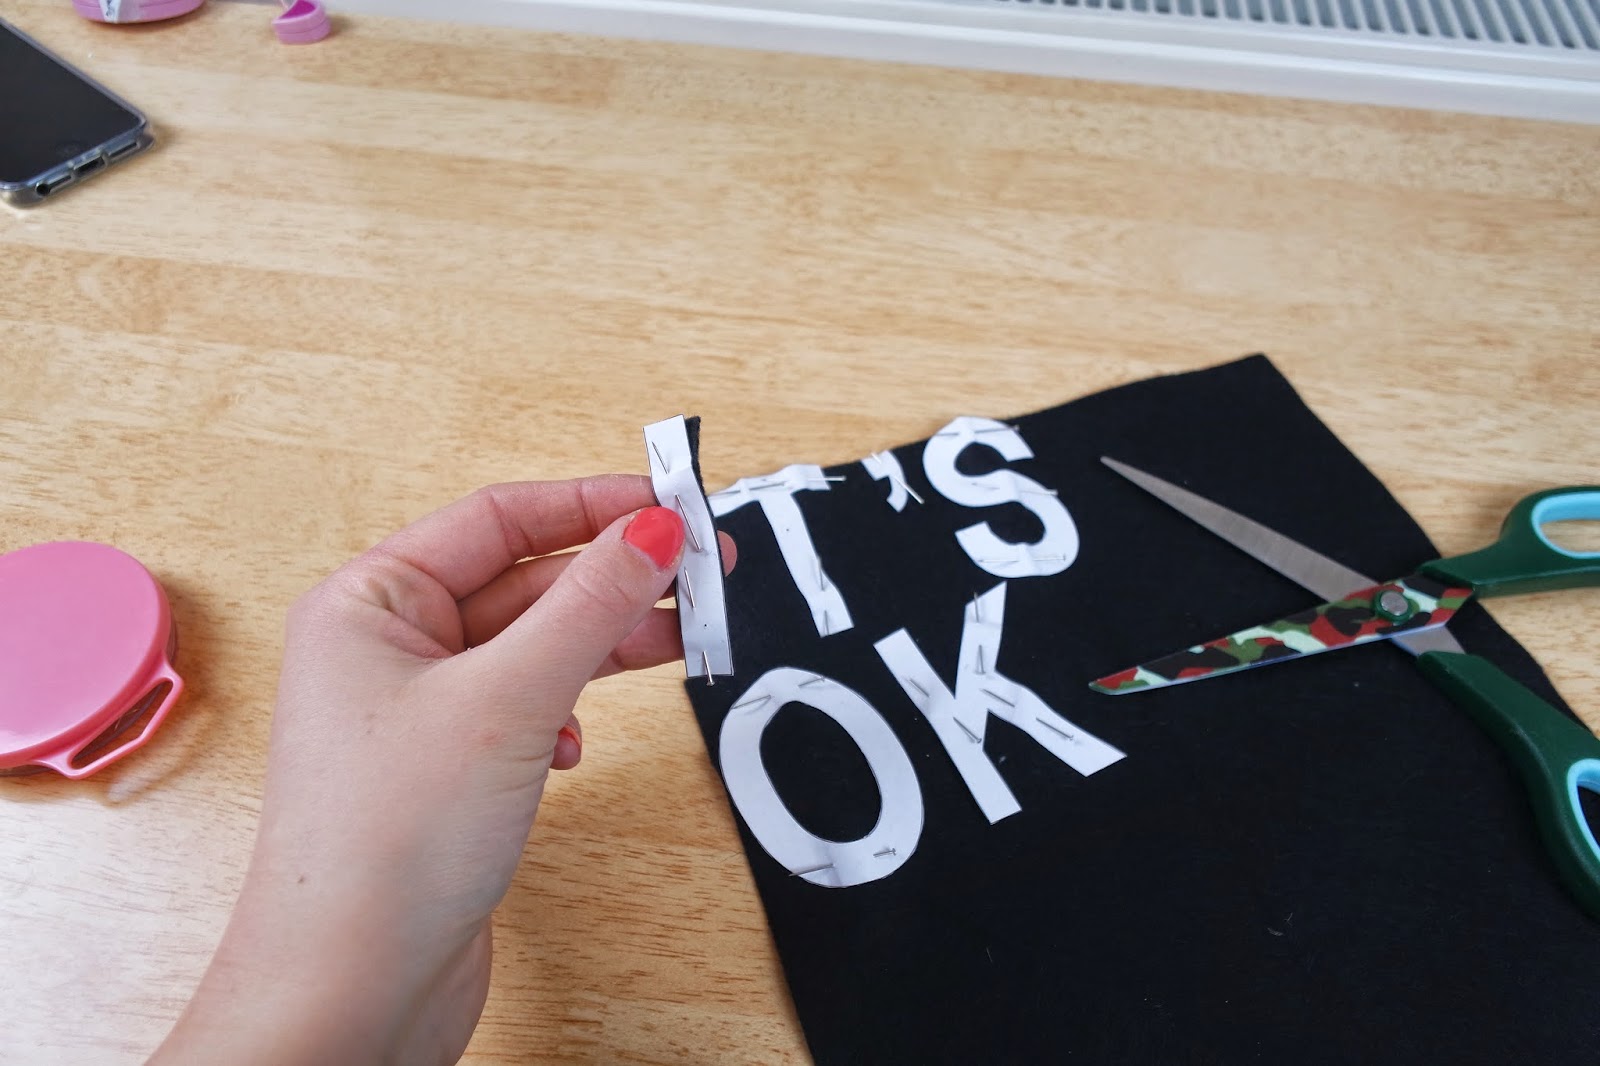 make your own it's ok banner